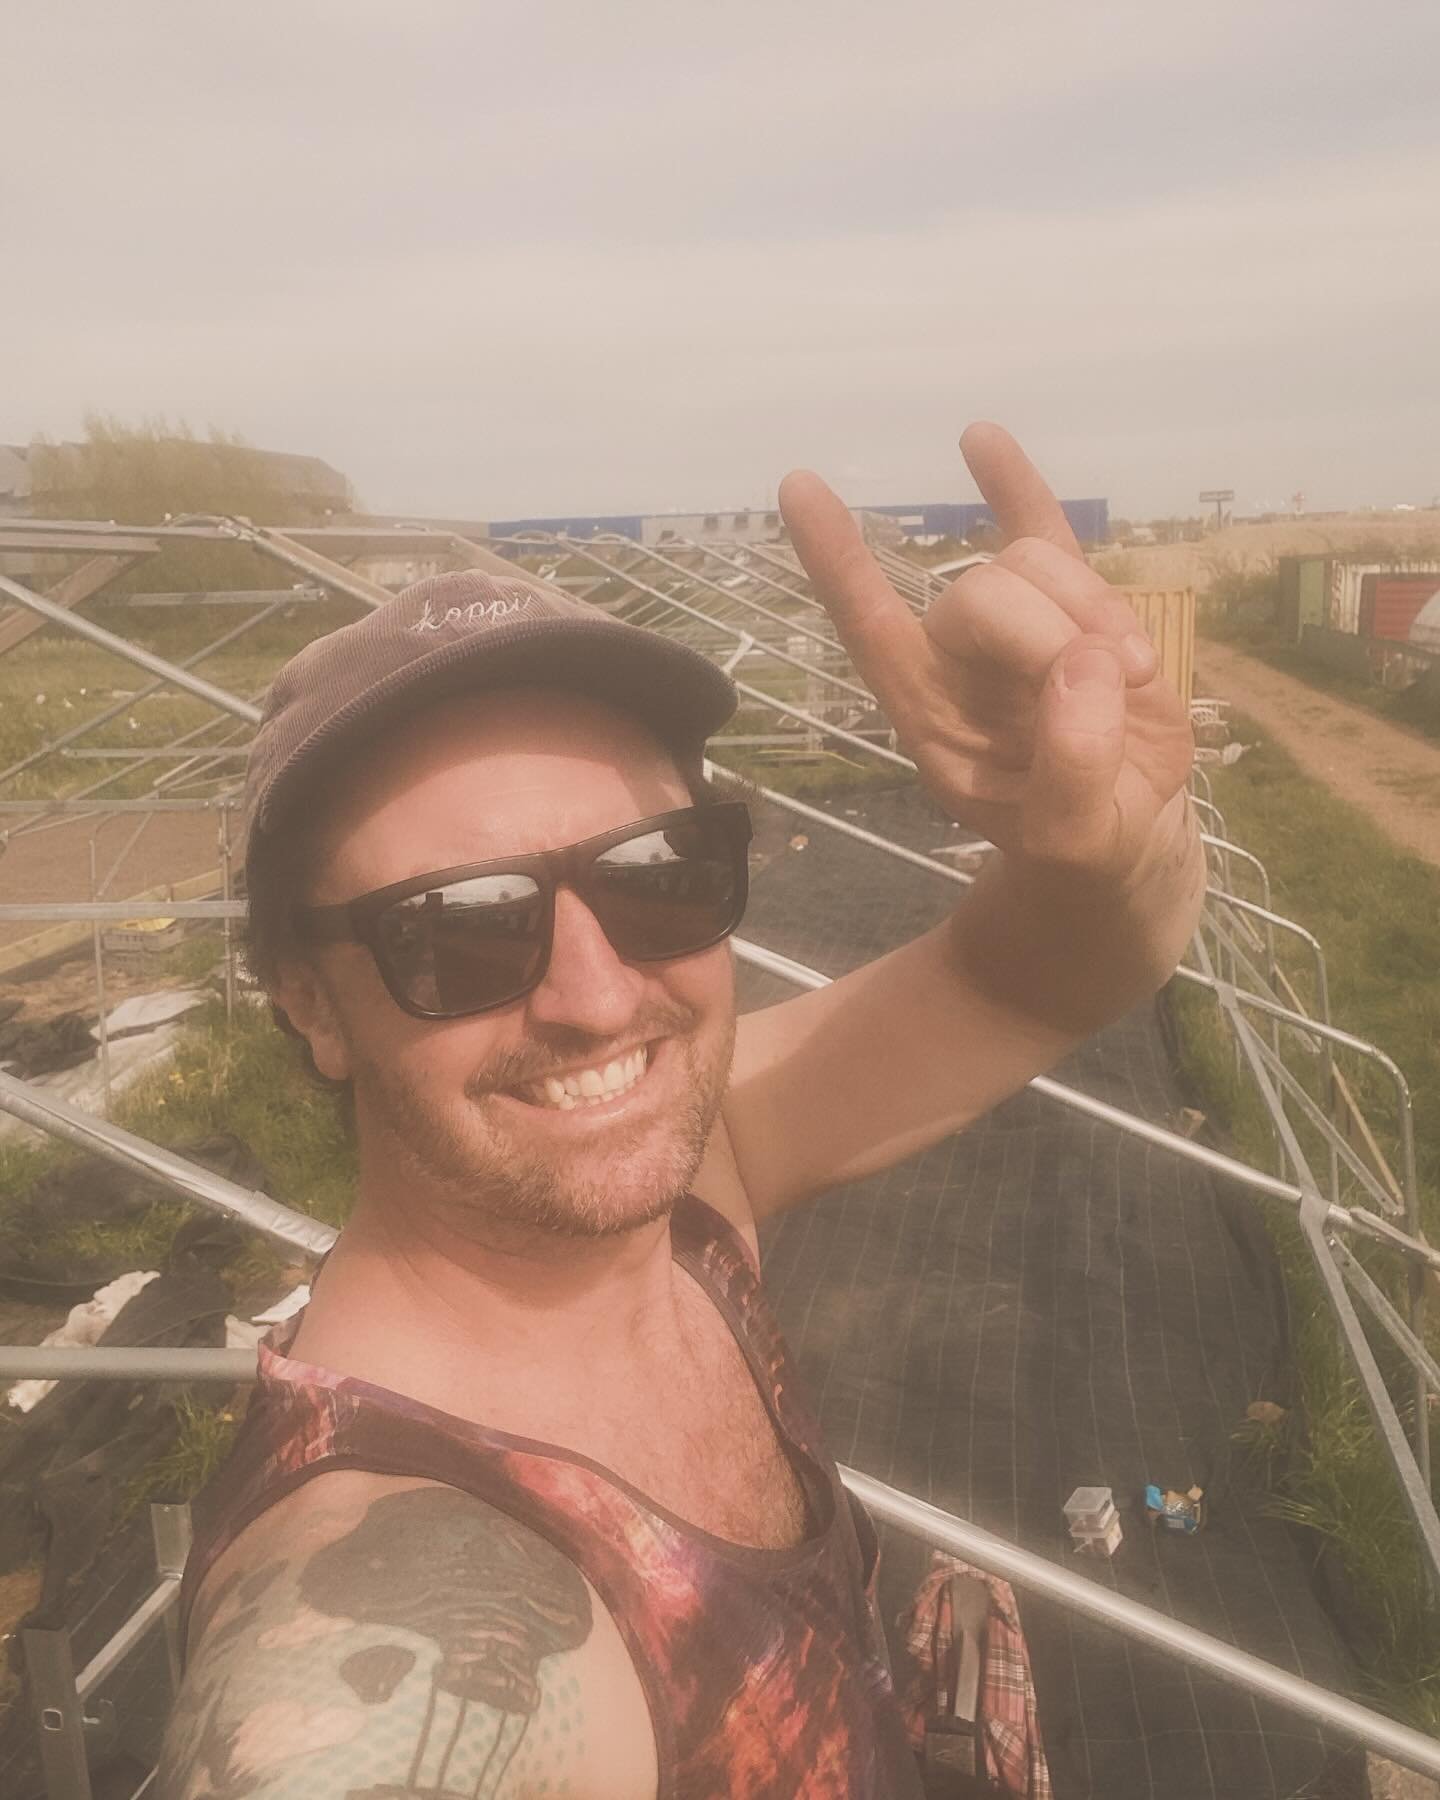 It&rsquo;s my birthday &amp; Walpurgis (Valborg), so we decided that Flax is CLOSED today &amp; that we are building a greenhouse at the farm as a birthday present. Seems fair. 
Also closed tomorrow because it&rsquo;s MAYDAY! Get out there, fly your 